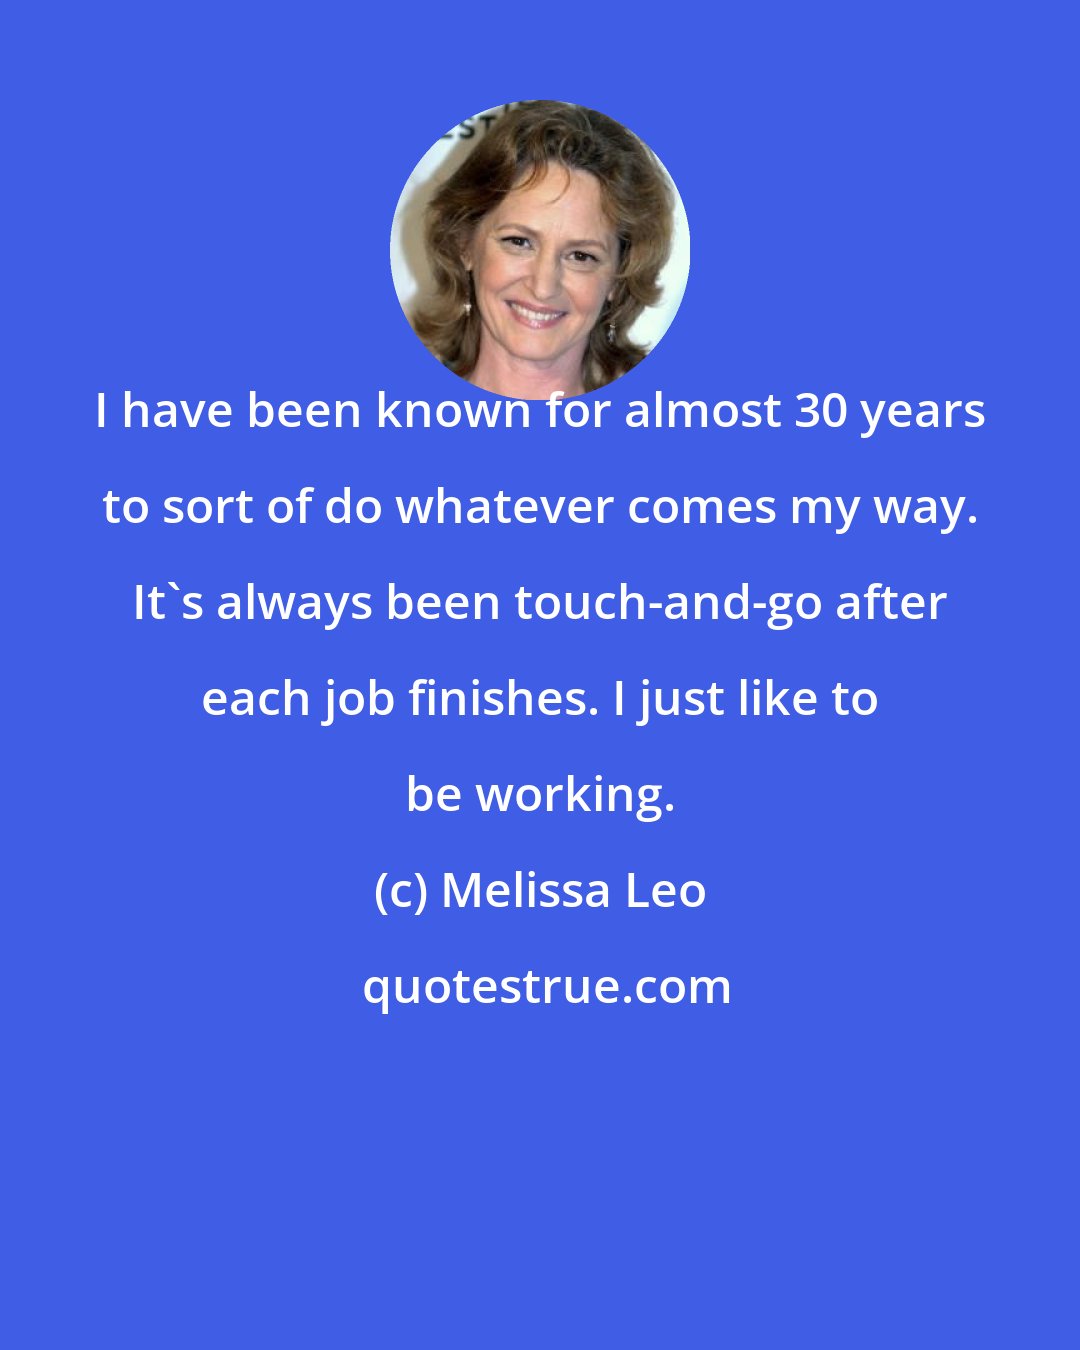 Melissa Leo: I have been known for almost 30 years to sort of do whatever comes my way. It's always been touch-and-go after each job finishes. I just like to be working.